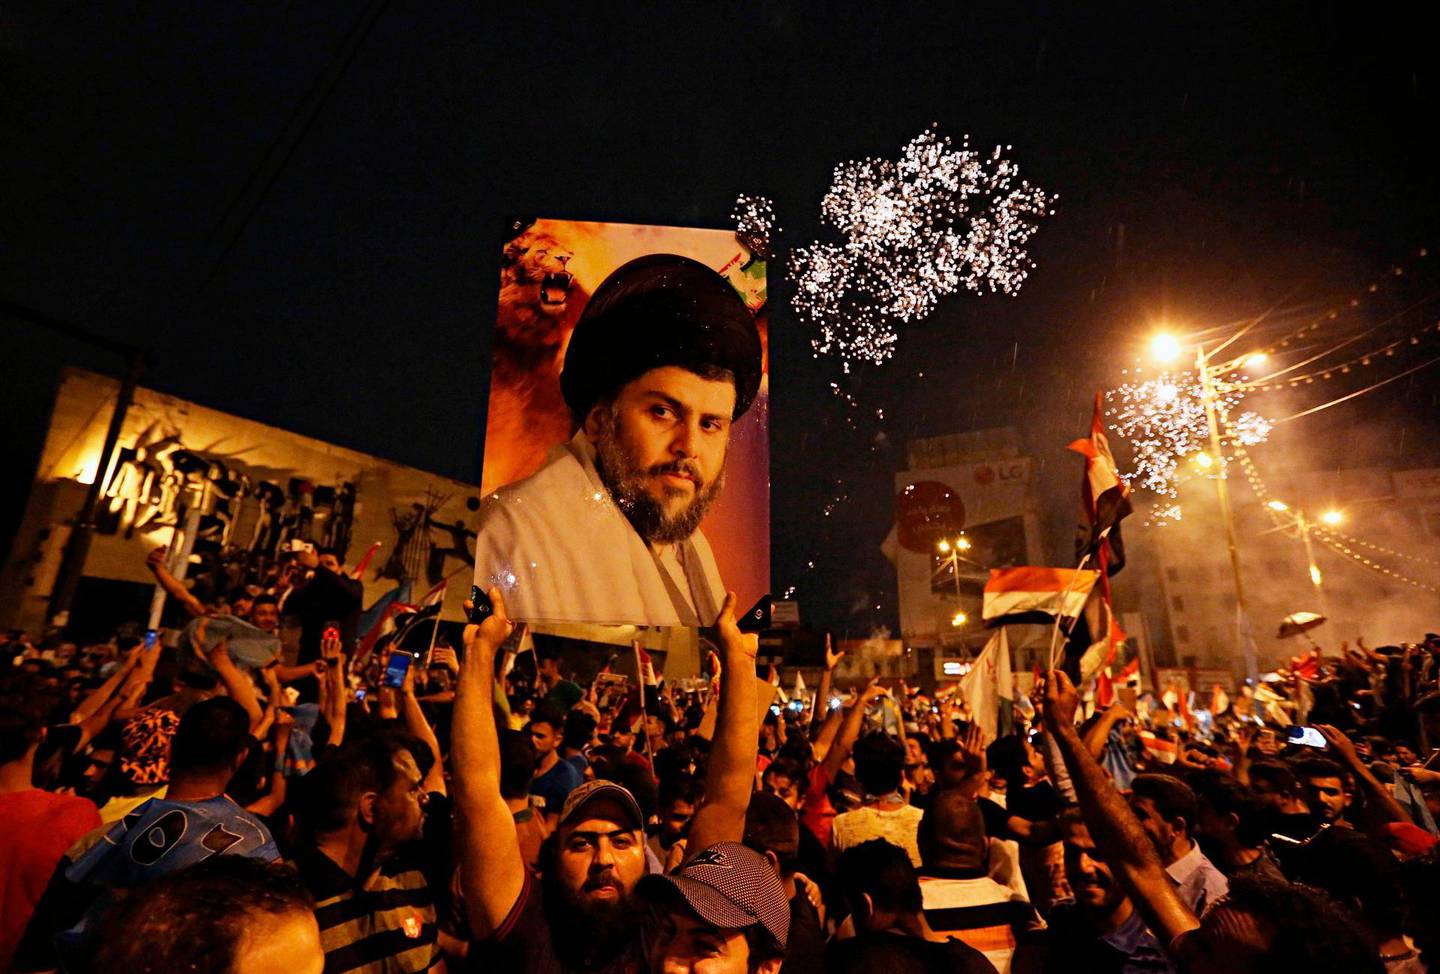 FILE - In this Monday, May 14, 2018 file photo, supporters of Shiite cleric Muqtada al-Sadr, carry his image as they celebrate in Tahrir Square, Baghdad, Iraq. Al-Sadr, who led punishing attacks on American forces after the 2003 U.S.-led overthrow of Saddam Hussein, appears set to secure the most significant victory of his political career with a strong showing in the May 12 parliamentary election. Al-Sadr gained popularity as a nationalist voice campaigning against corruption and against Iranâ€™s influence in the country. (AP Photo/Hadi Mizban)